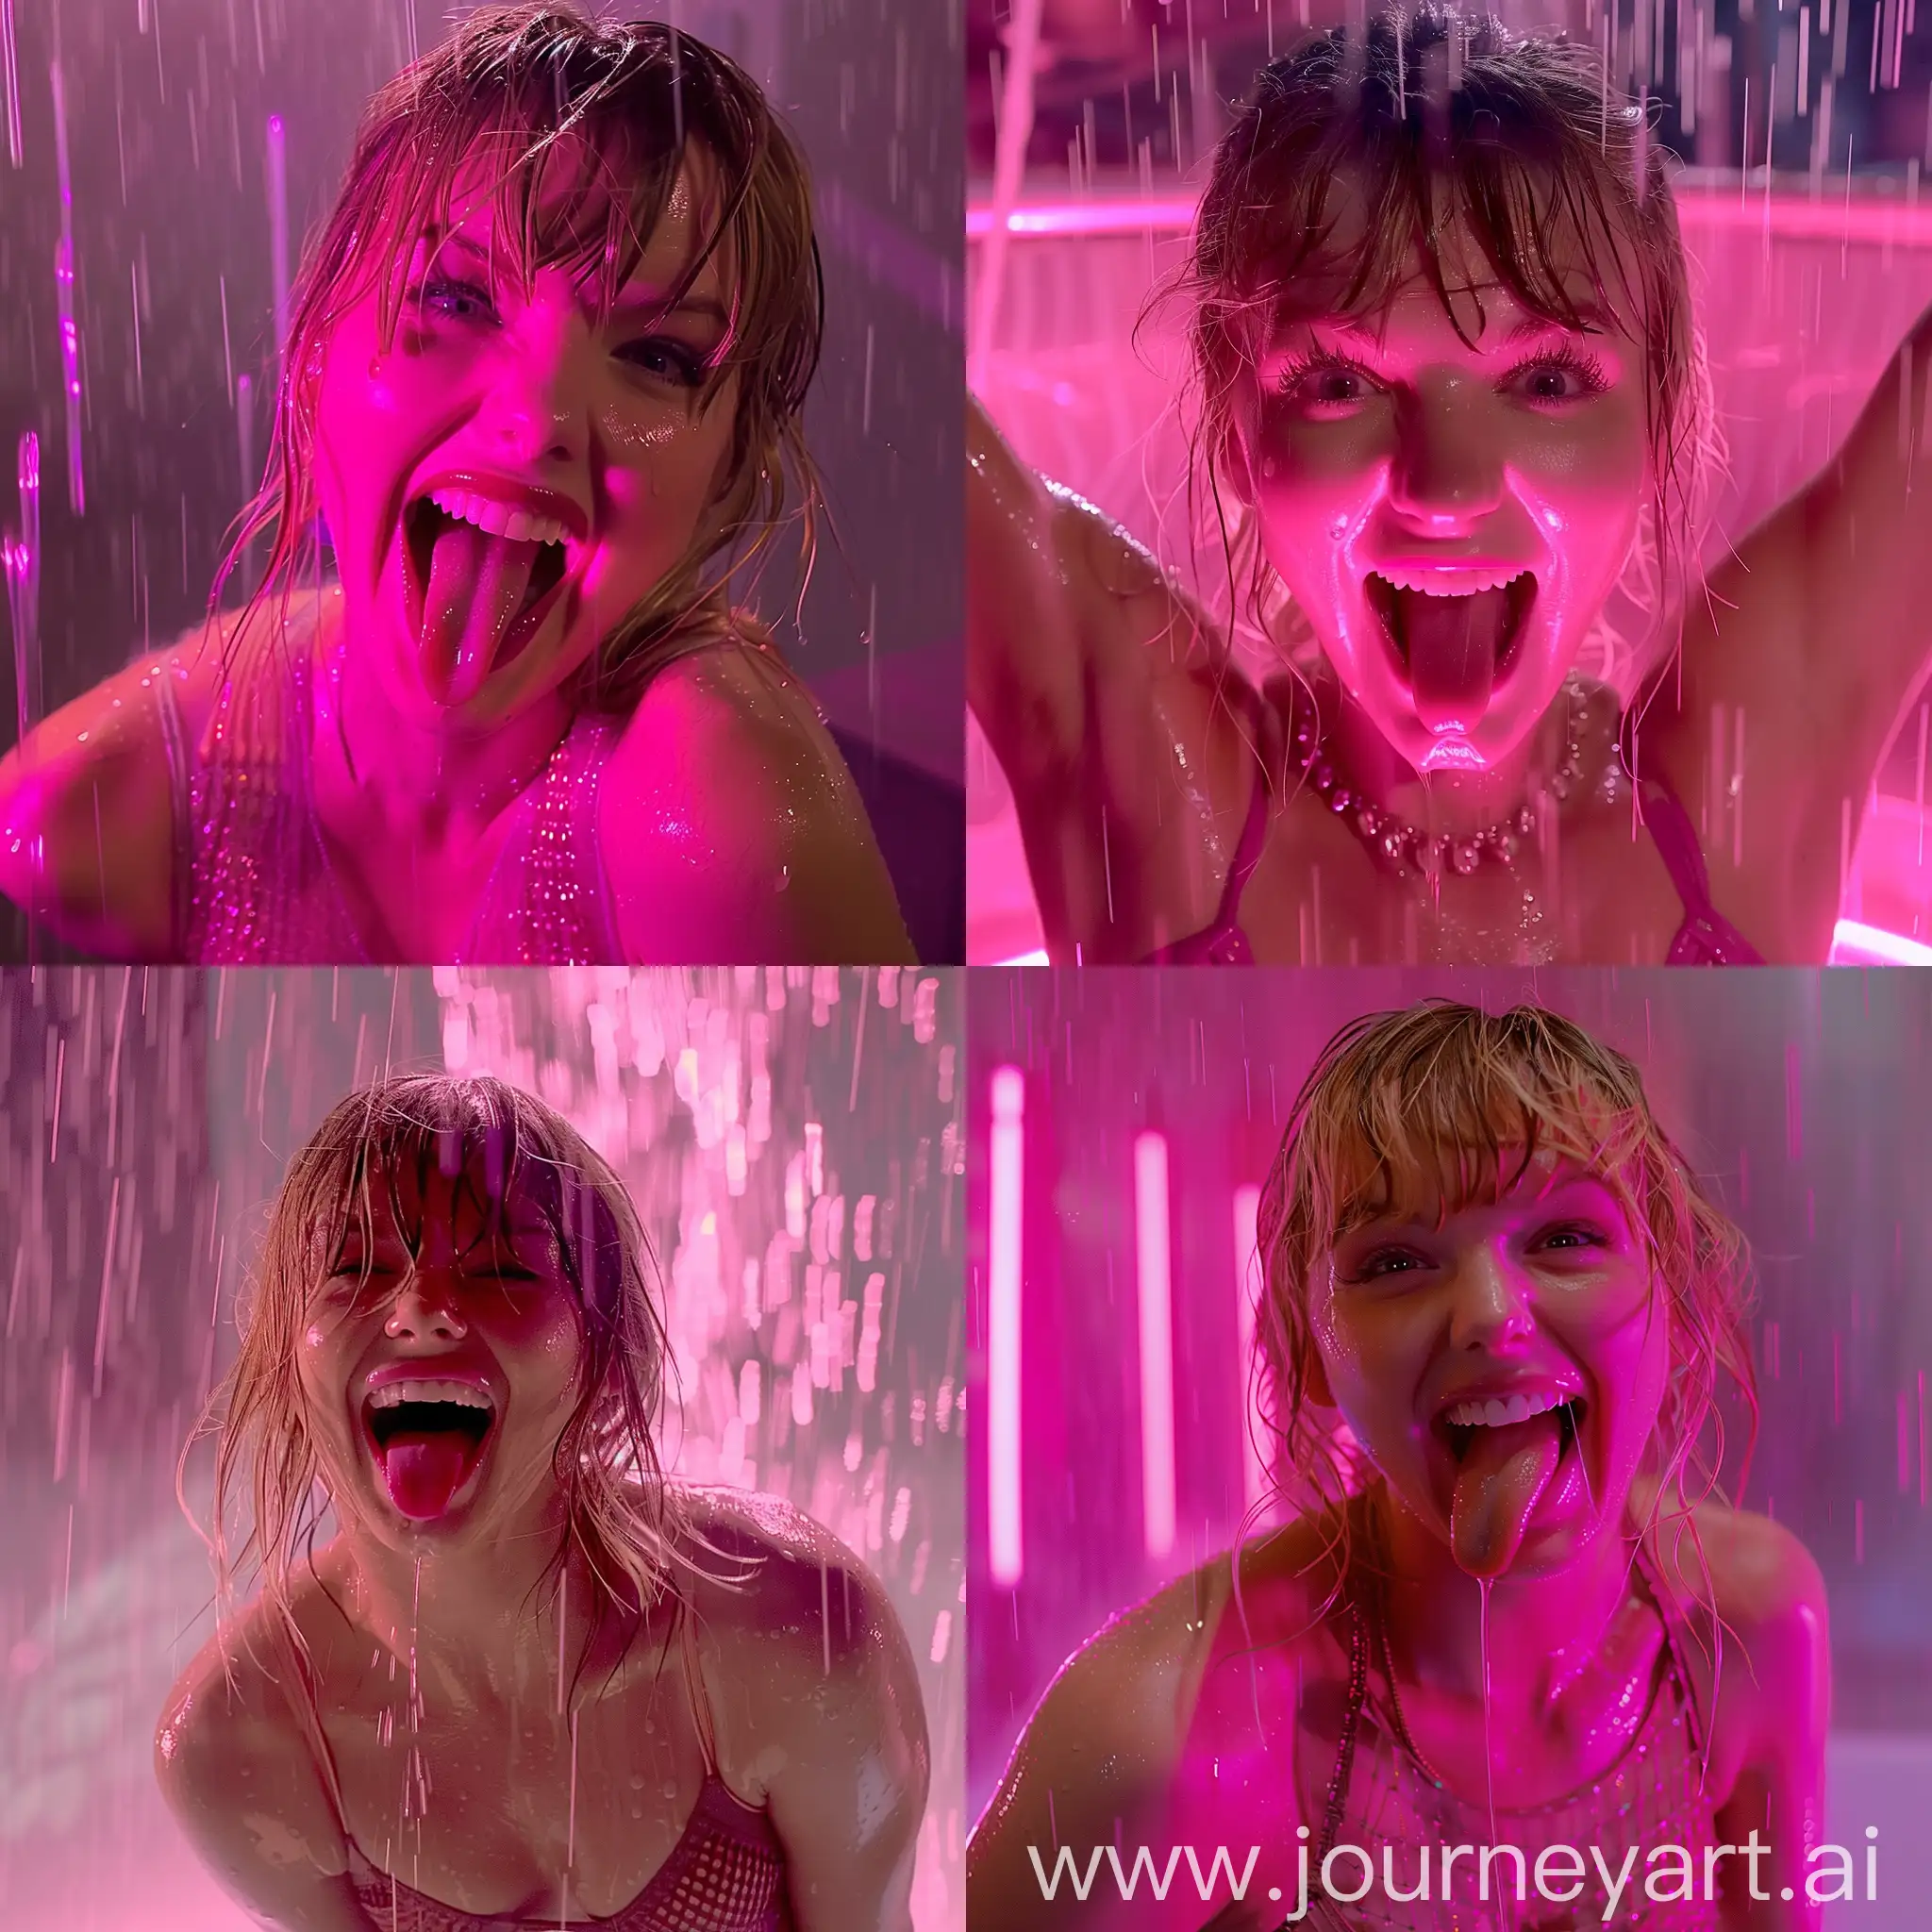 movie still, taylor swift at the eras tour, happy, tongue cleaning teeth, perspiration,fit abdomen,sheer top,pink lighting,pink lipstick,messy bangs,rainy day